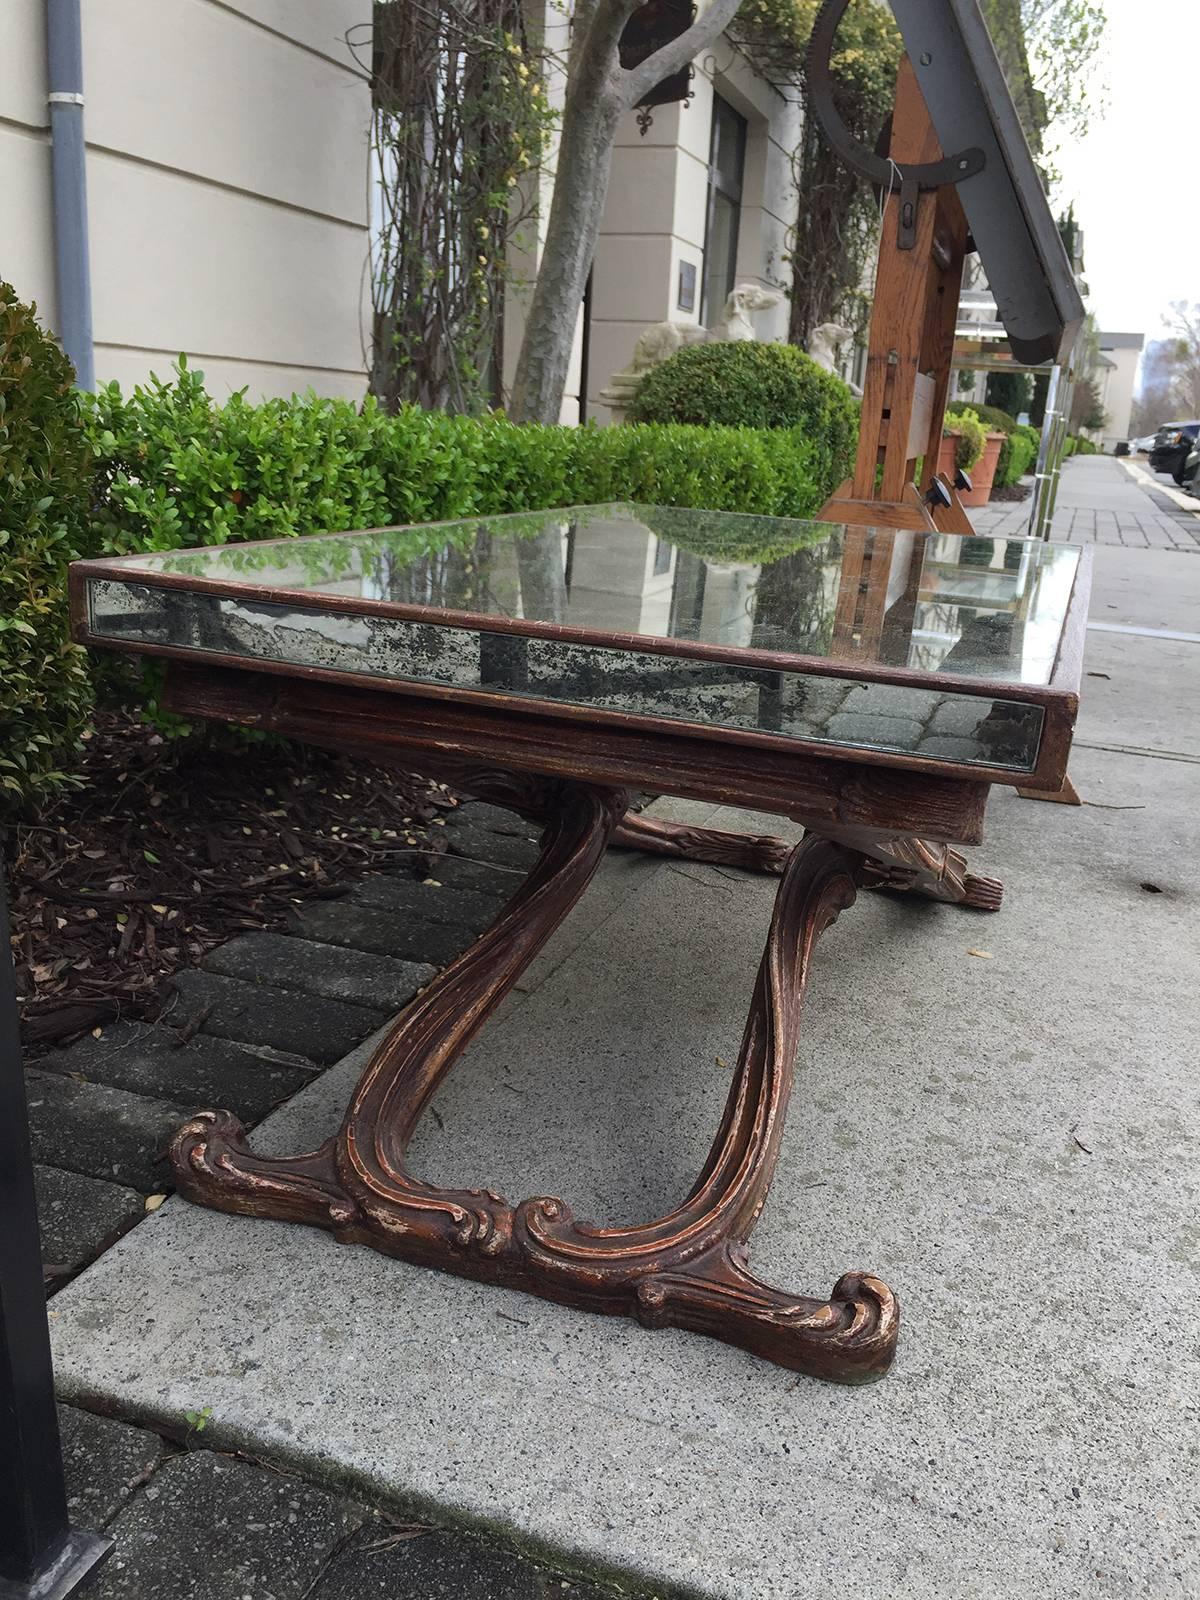 Early to Mid-20th Century Italian mirrored coffee table in the style of Jansen.